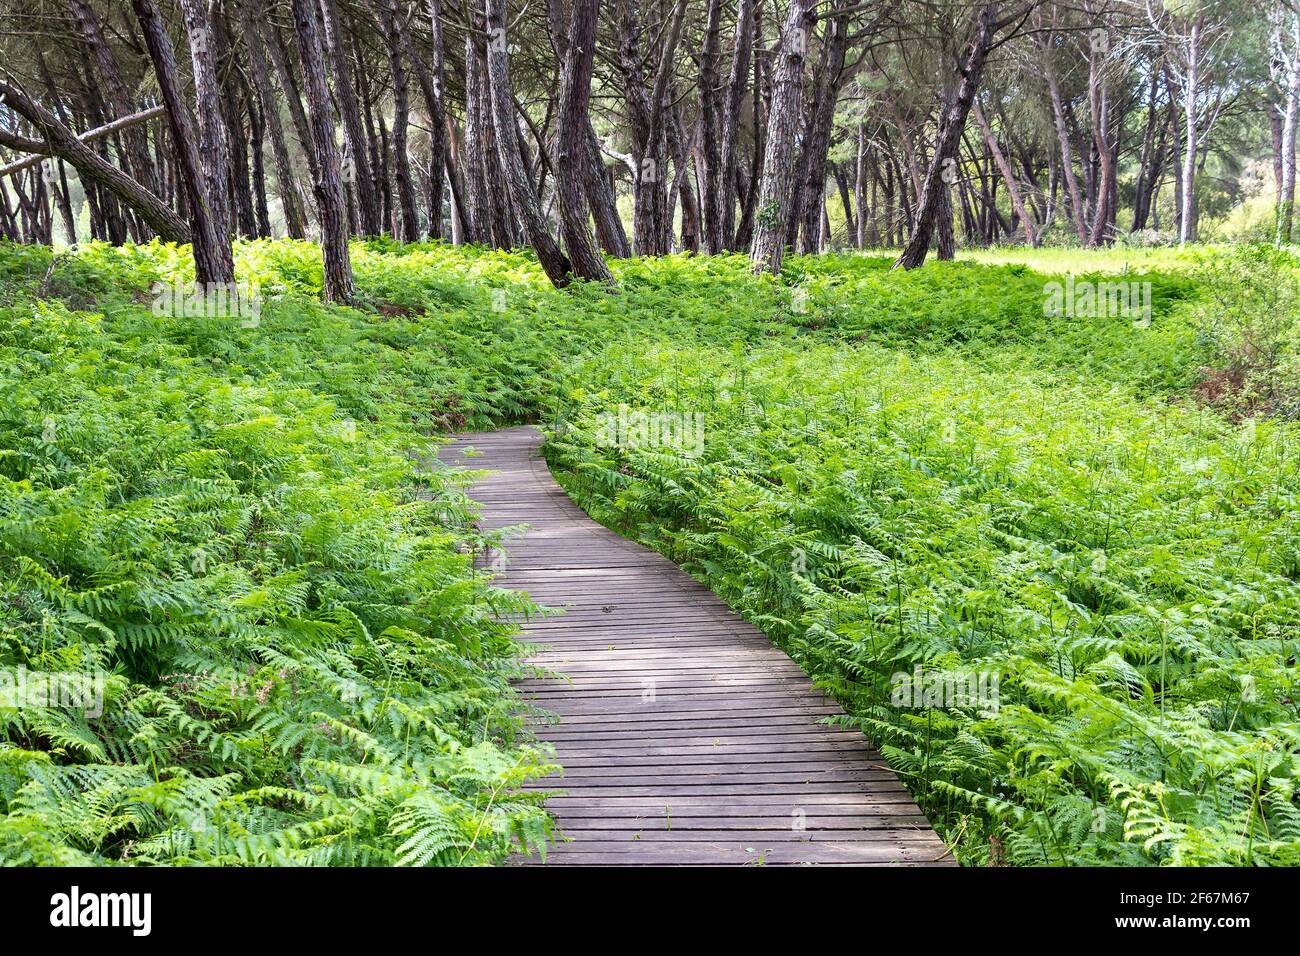 Wooden path in the forest for hiking trails Stock Photo